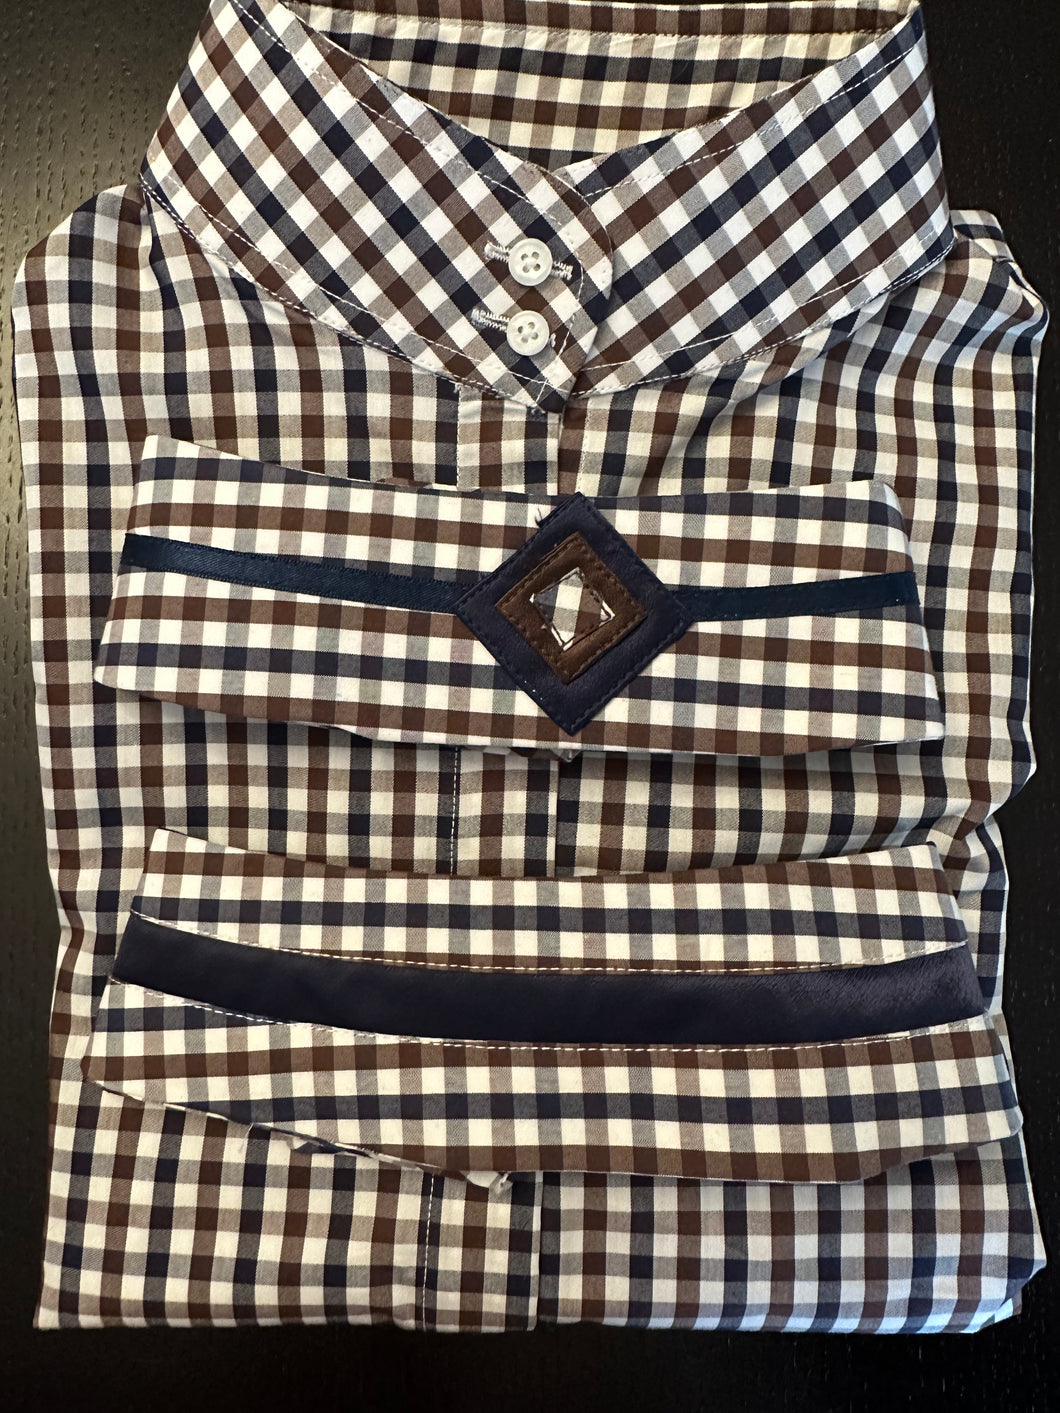 Navy & Brown Check: 2 Collars - Size 36 (1)